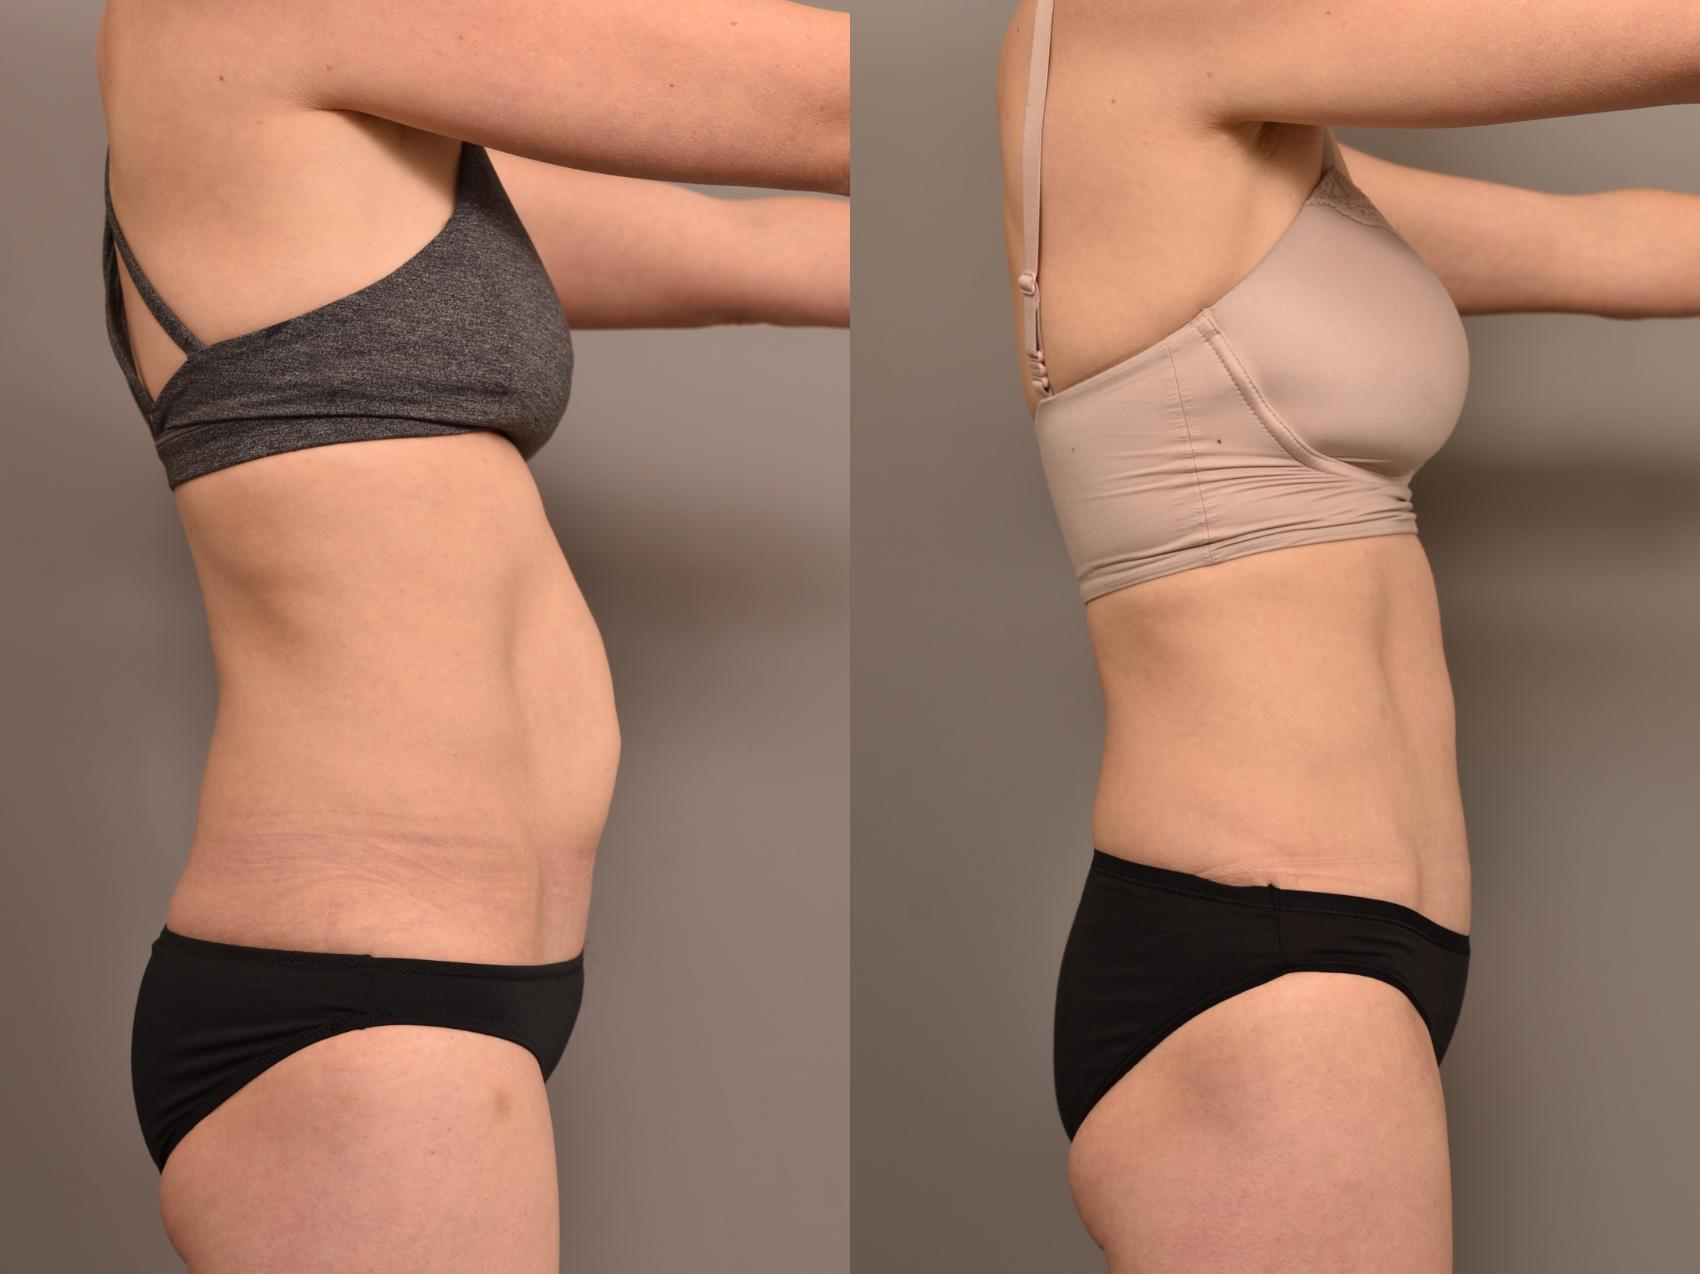 One month postpartum diastasis update after baby #2 and Bellies